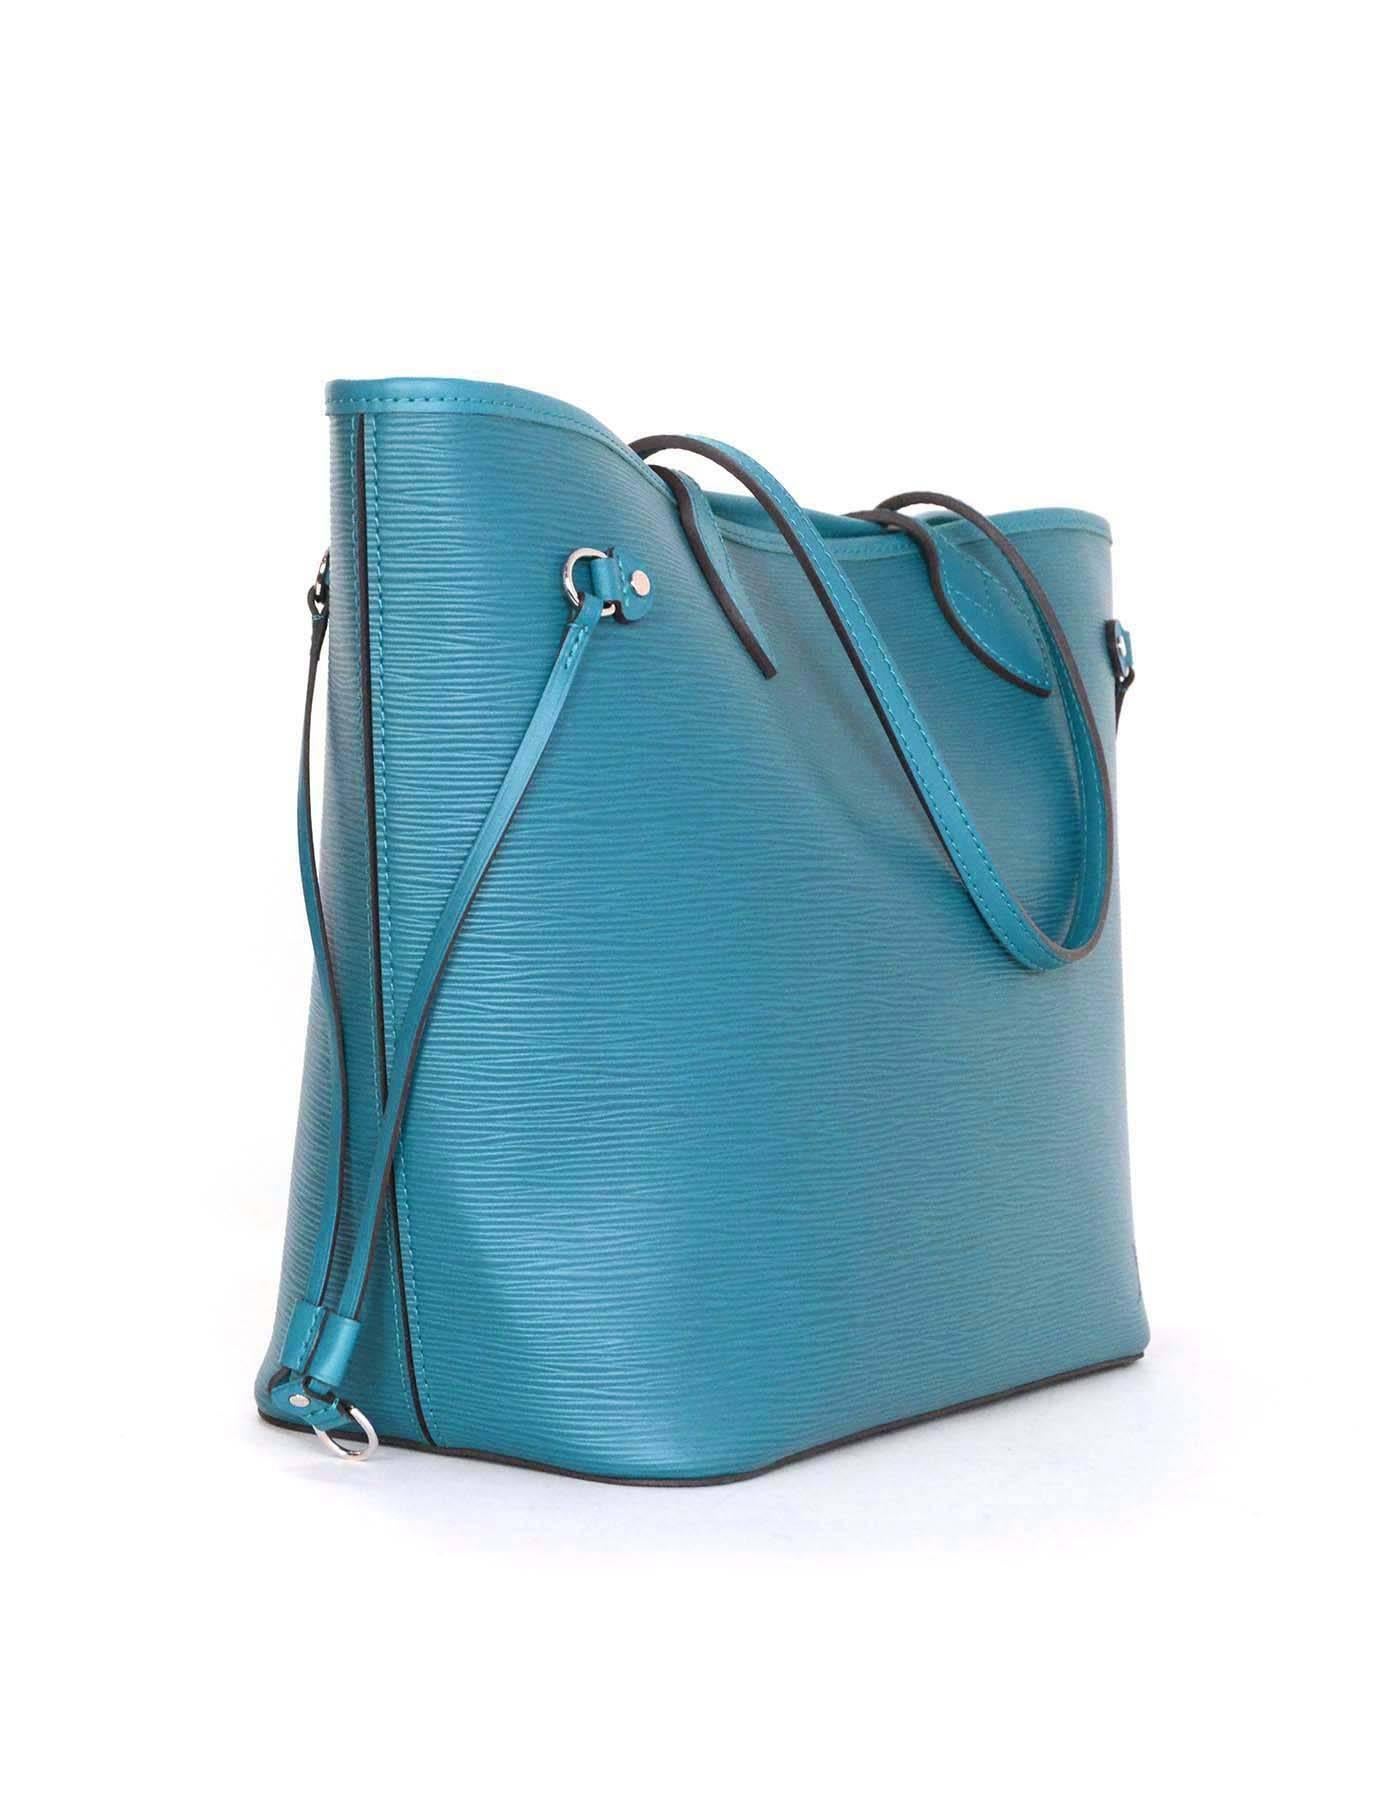 Louis Vuitton Cyan Neverfull MM
Features removable insert that can be used as a wallet, clutch, or pouch separate from the bag

    Made in: Spain
    Year of Production: 2013
    Color: Teal
    Hardware: Silvertone
    Materials: Epi